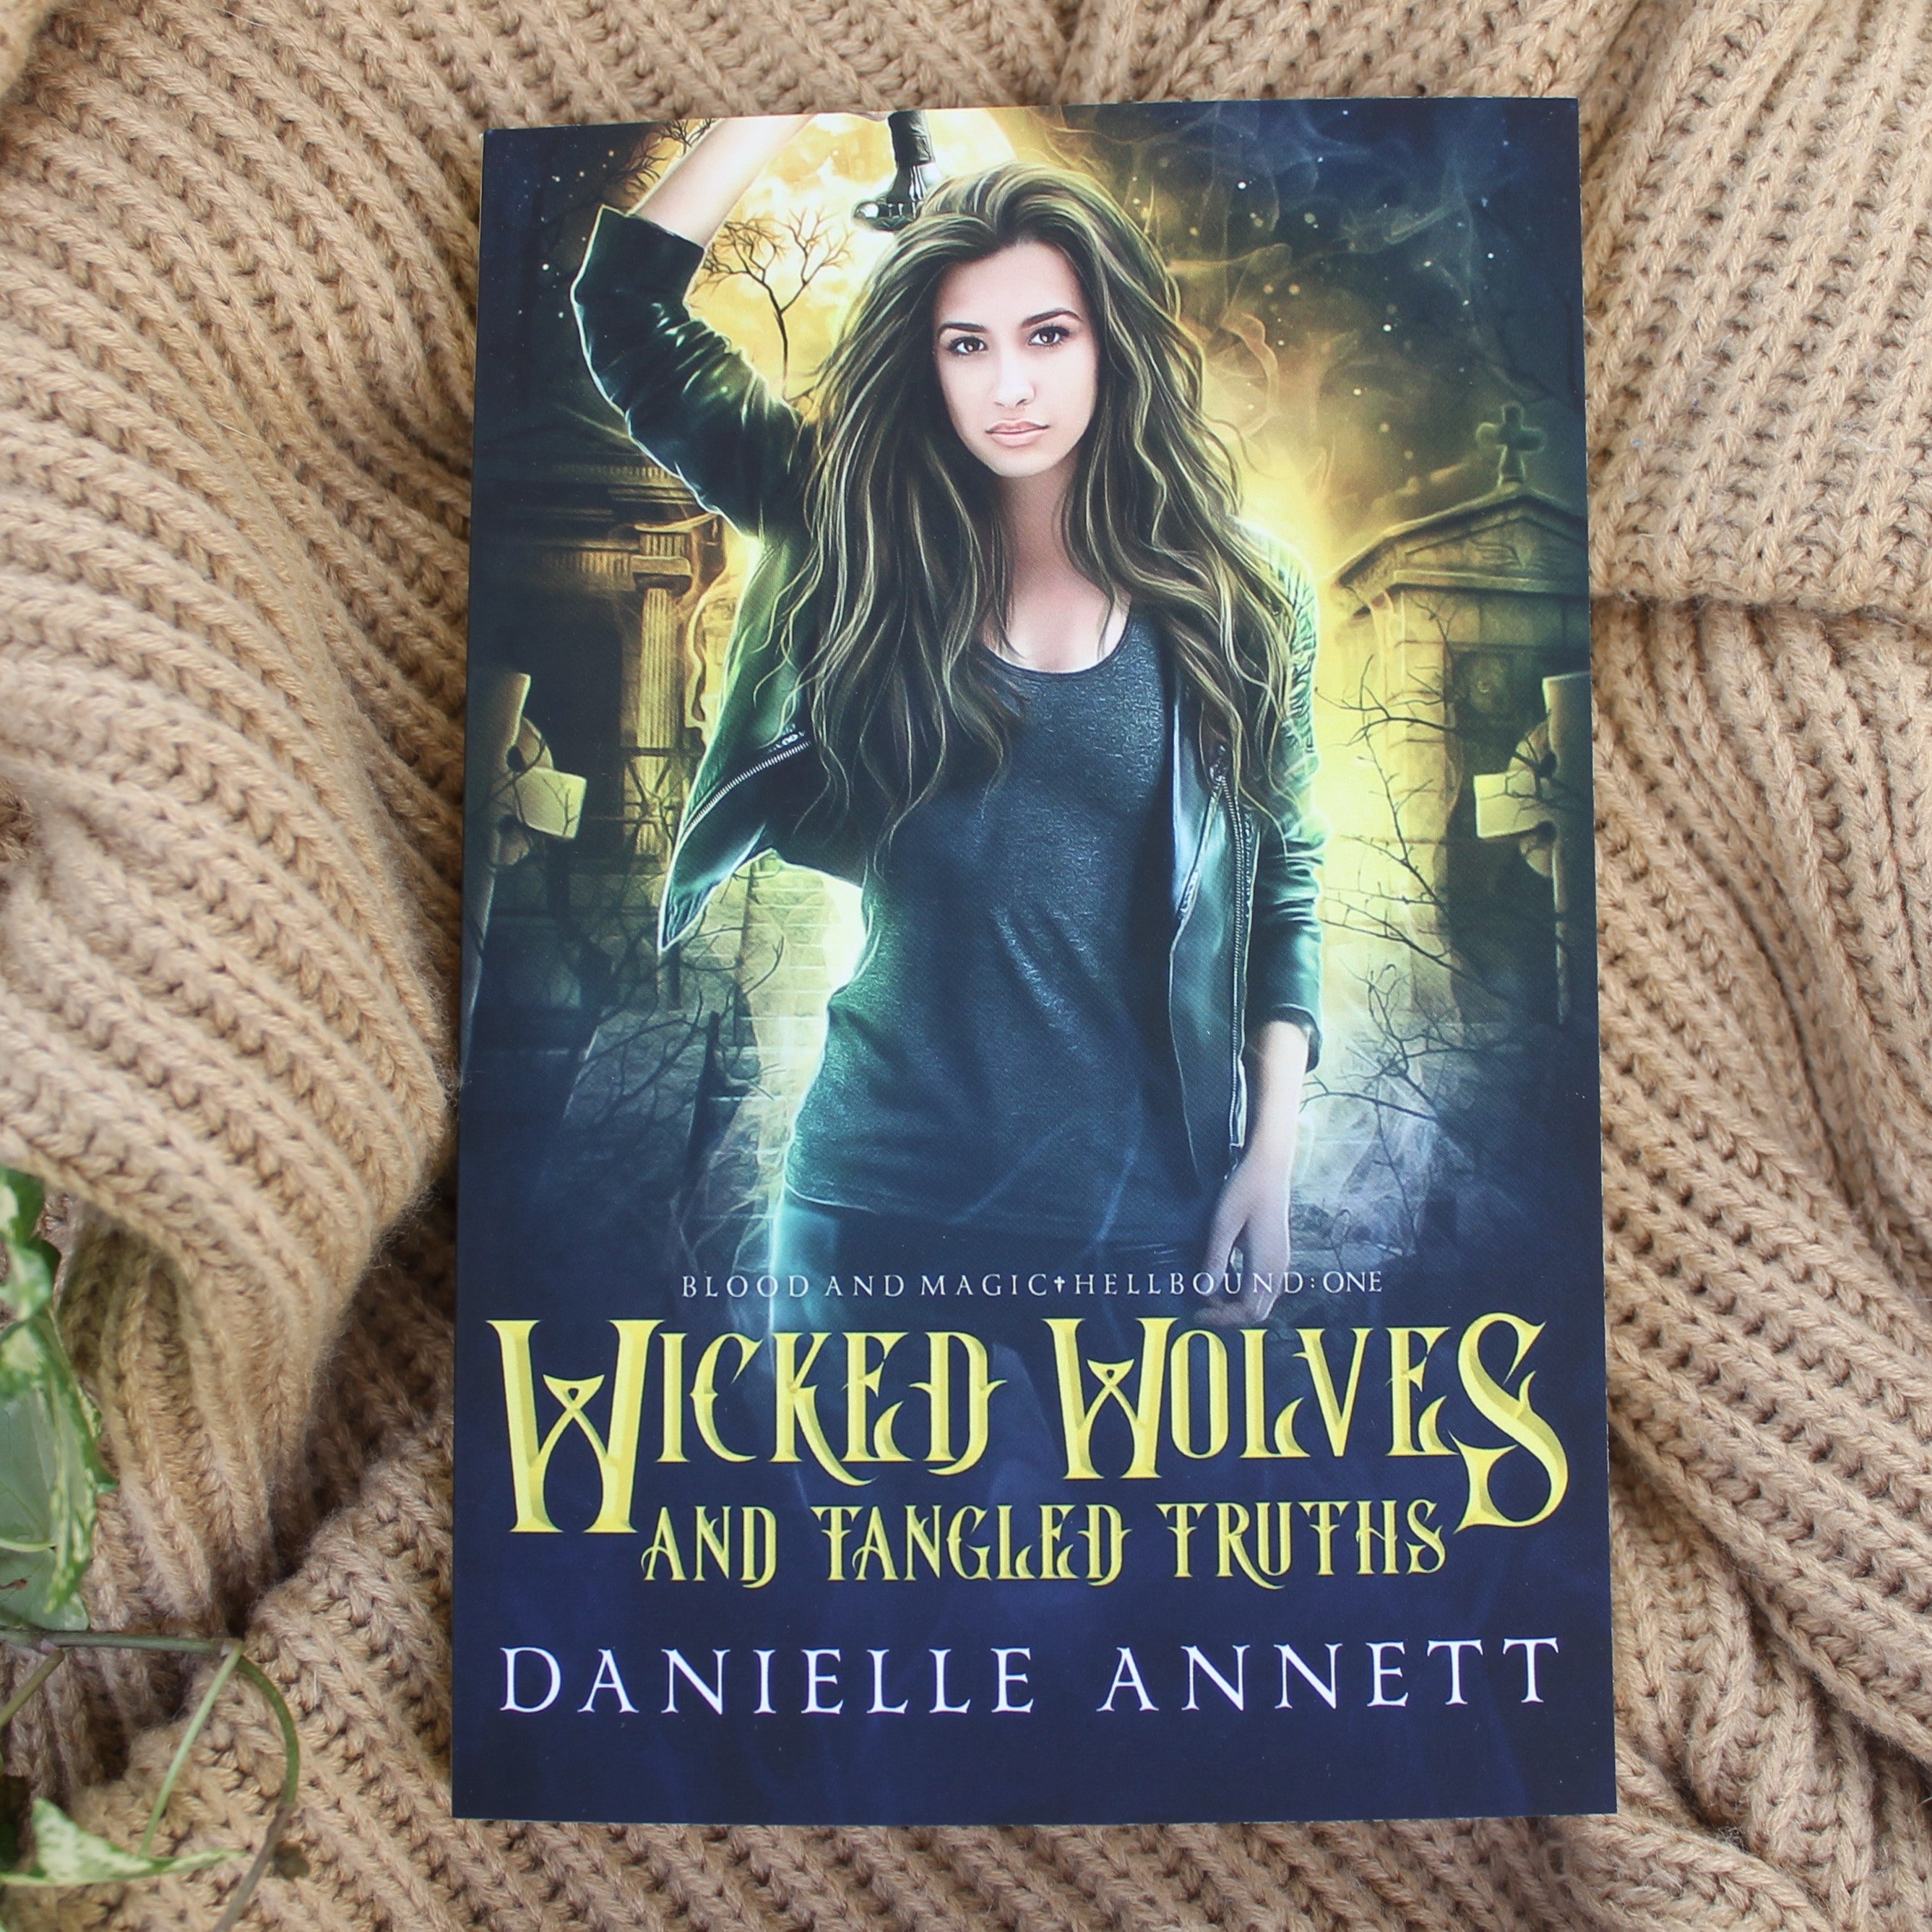 Wicked Wolves and Tangled Truths by Daniella Annett